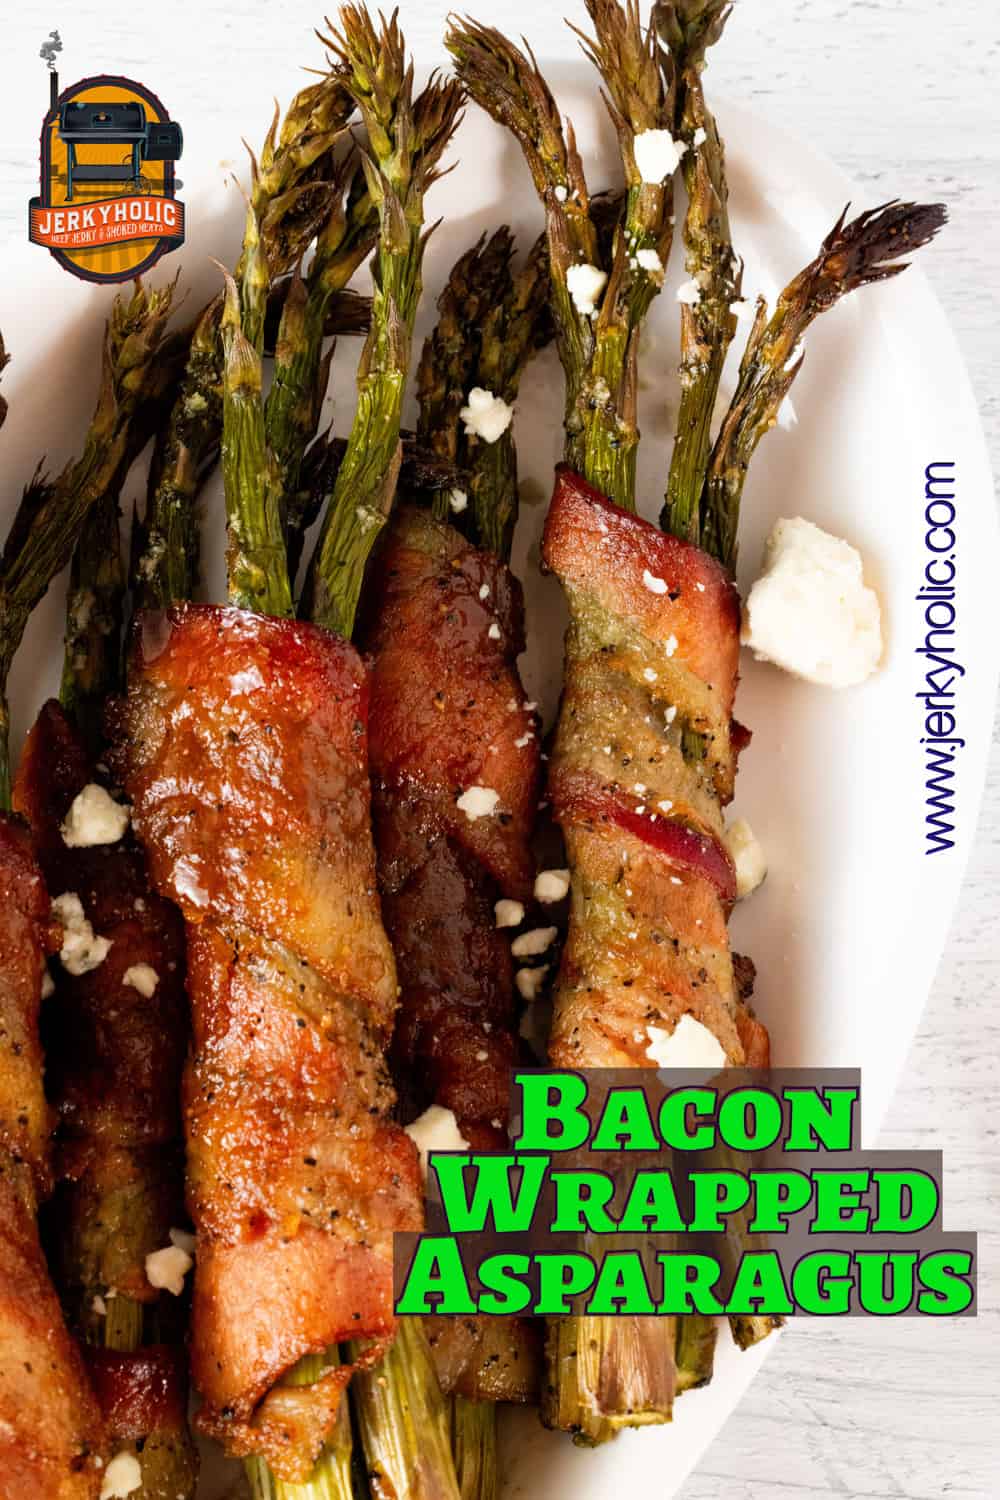 Bacon Wrapped Asparagus (Smoked)